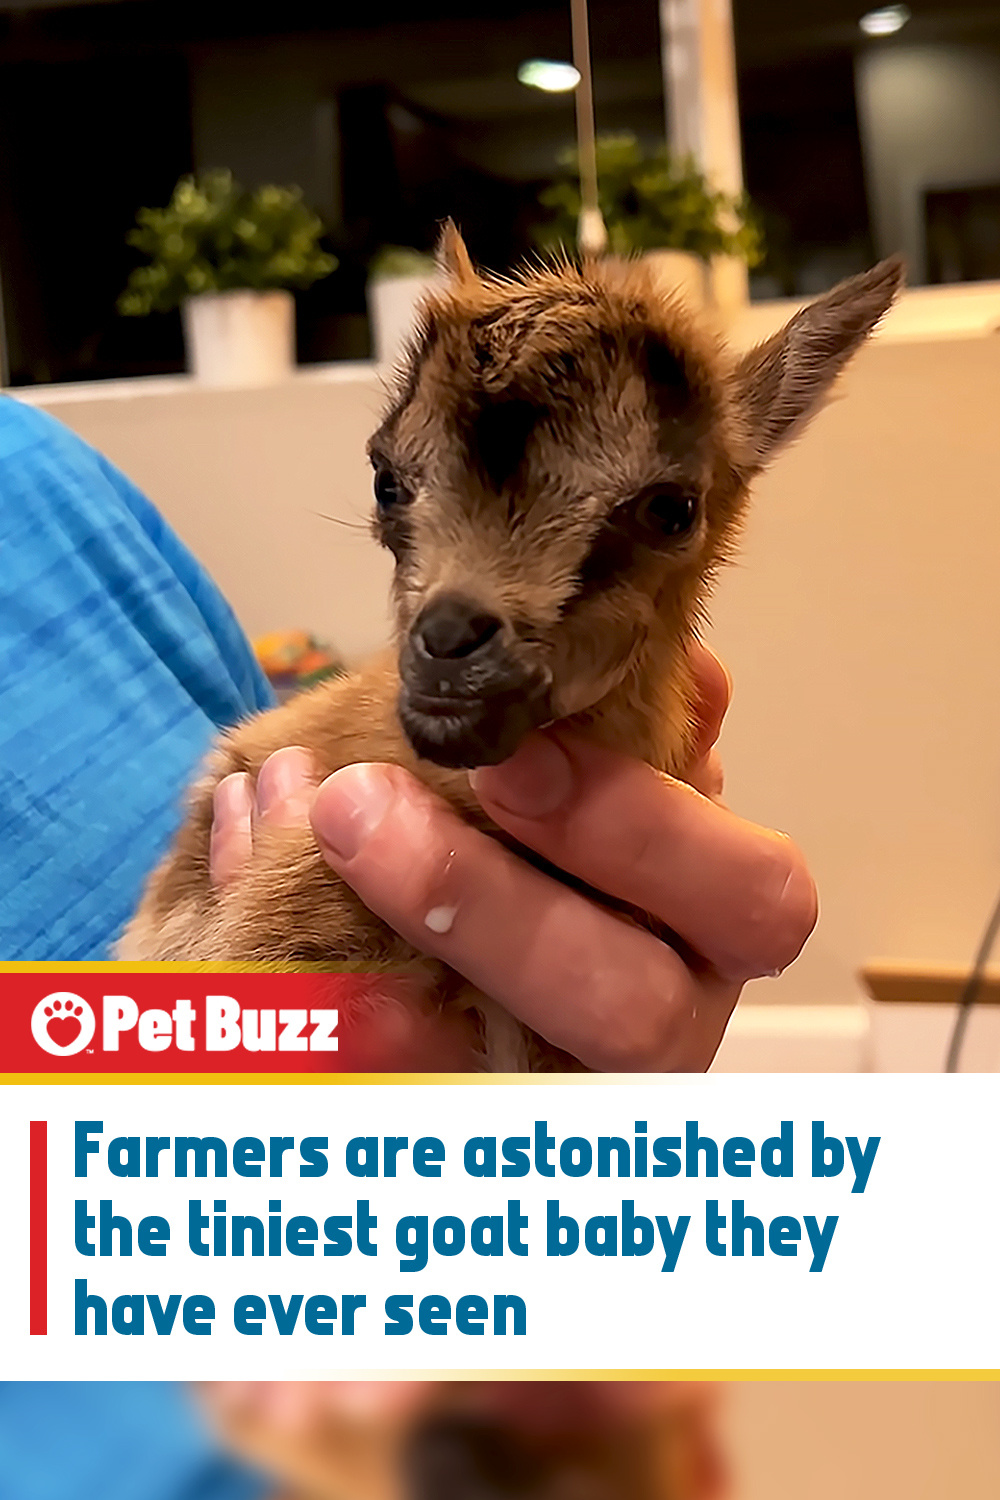 Farmers are astonished by the tiniest goat baby they have ever seen